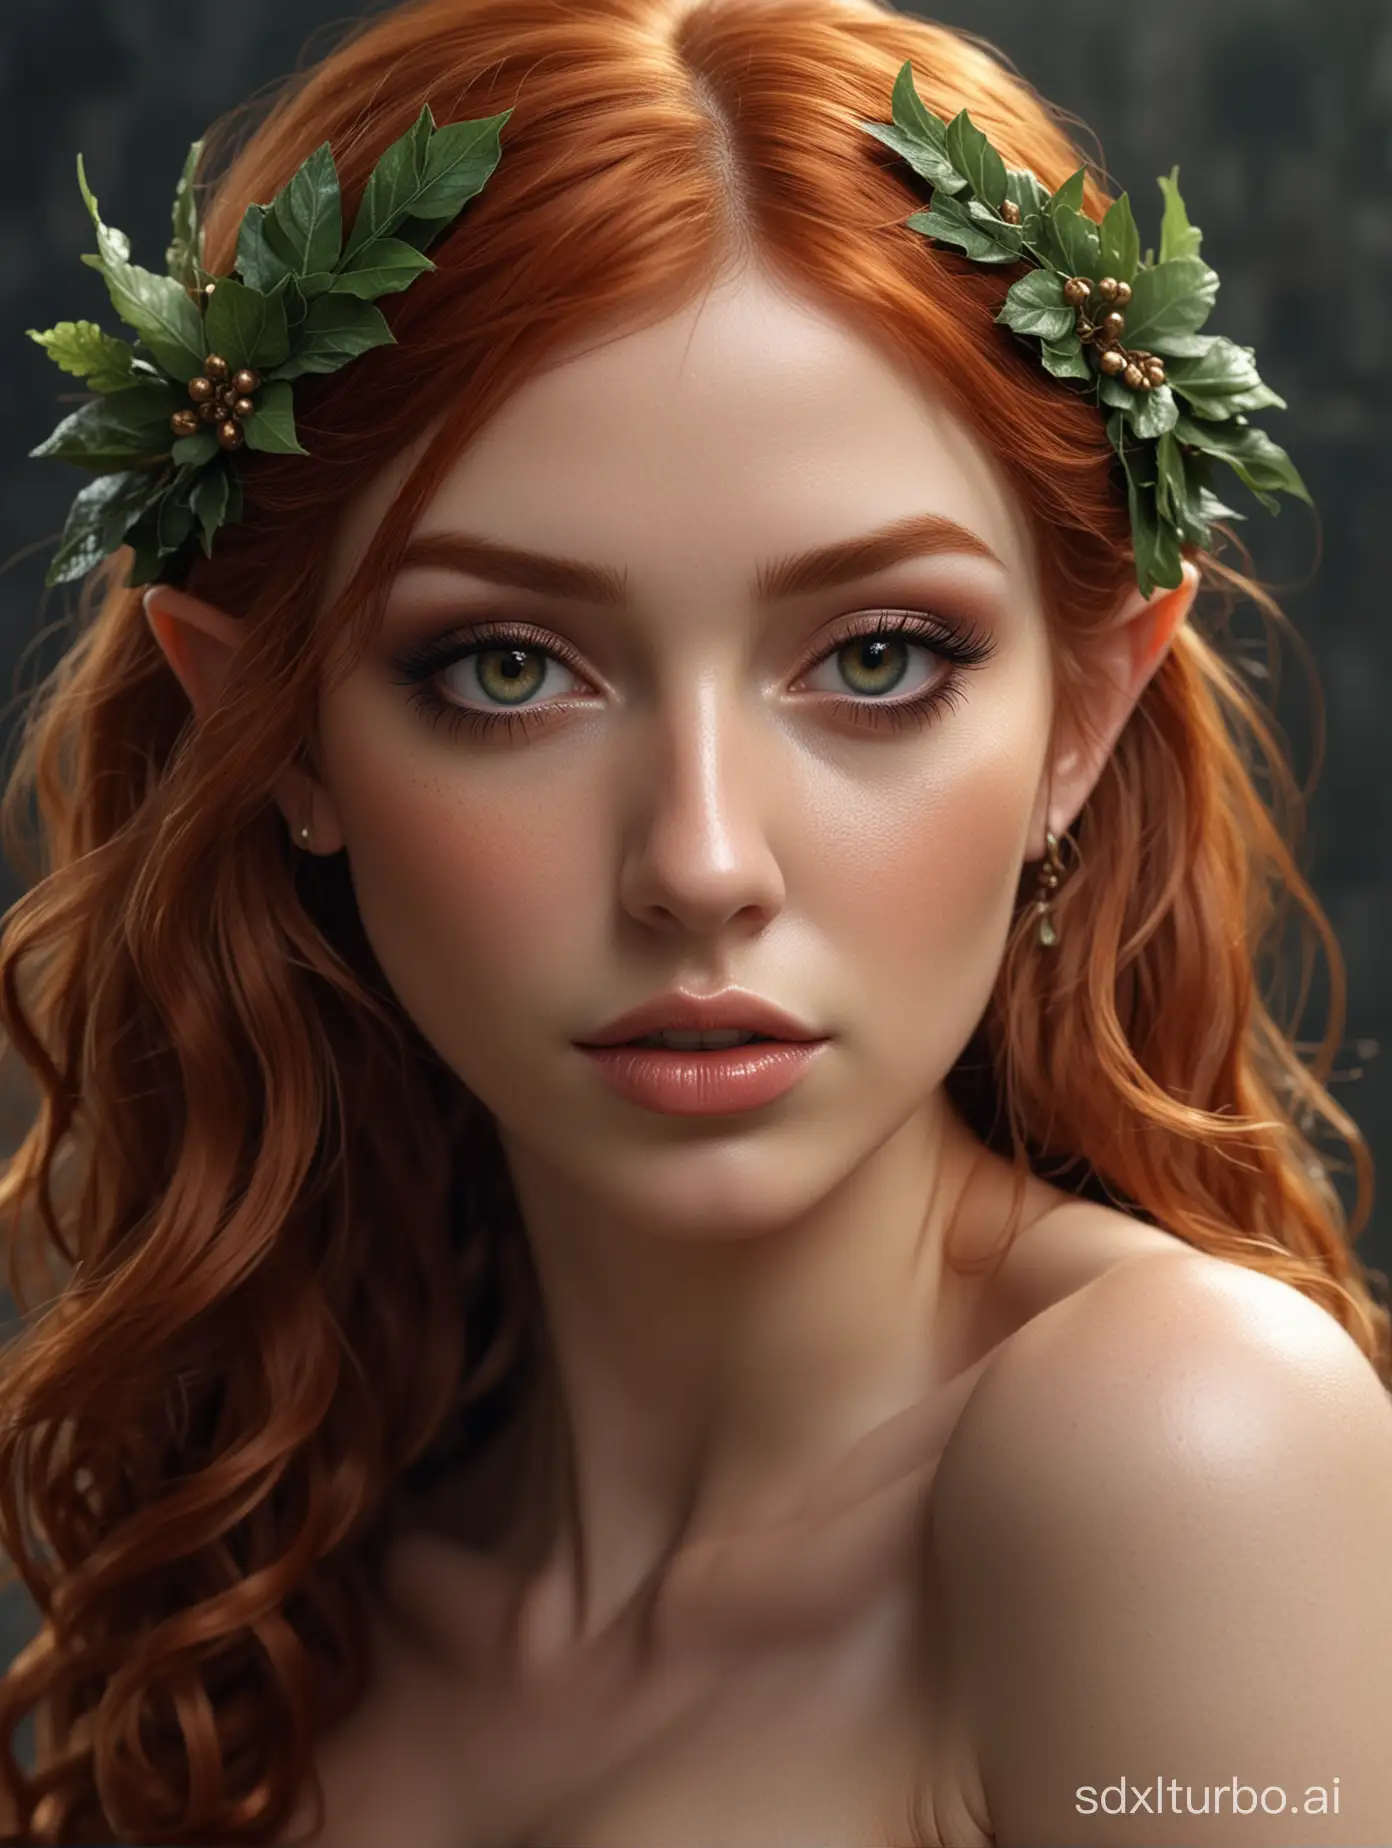 Seductive Ginger Haired Elf, Delicate Makeup, Alluring Pose, detailed and intricate, hyper realist